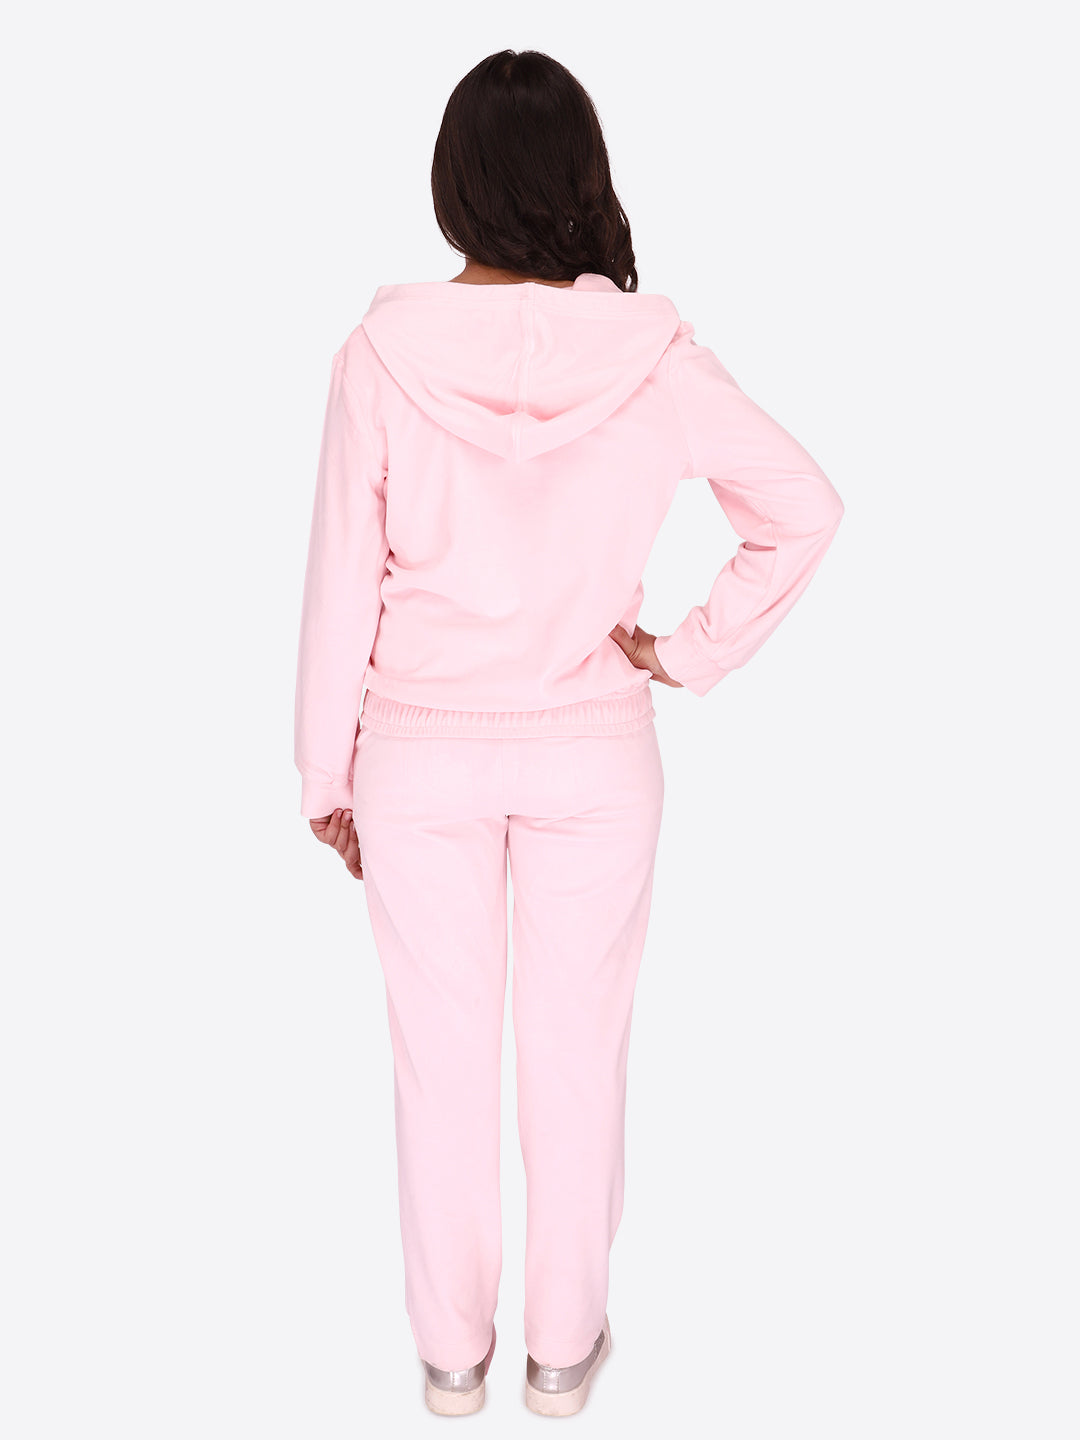 Partywear Embellished Track Suit Girls